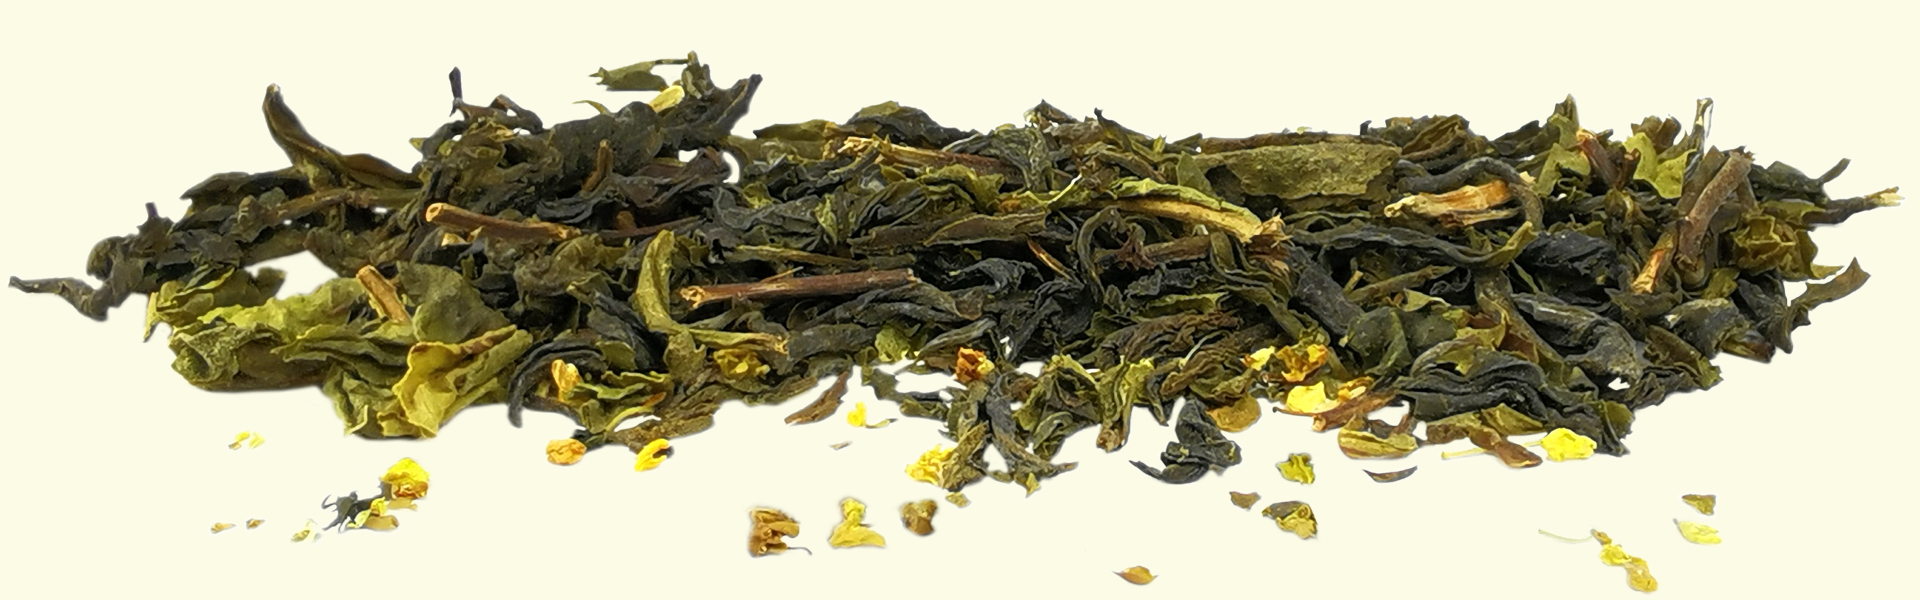 A green Assam tea in non-rolled leaves, with Osmanthus flowers : a tea with marked floral aromas, easy to prepare & to enjoy.